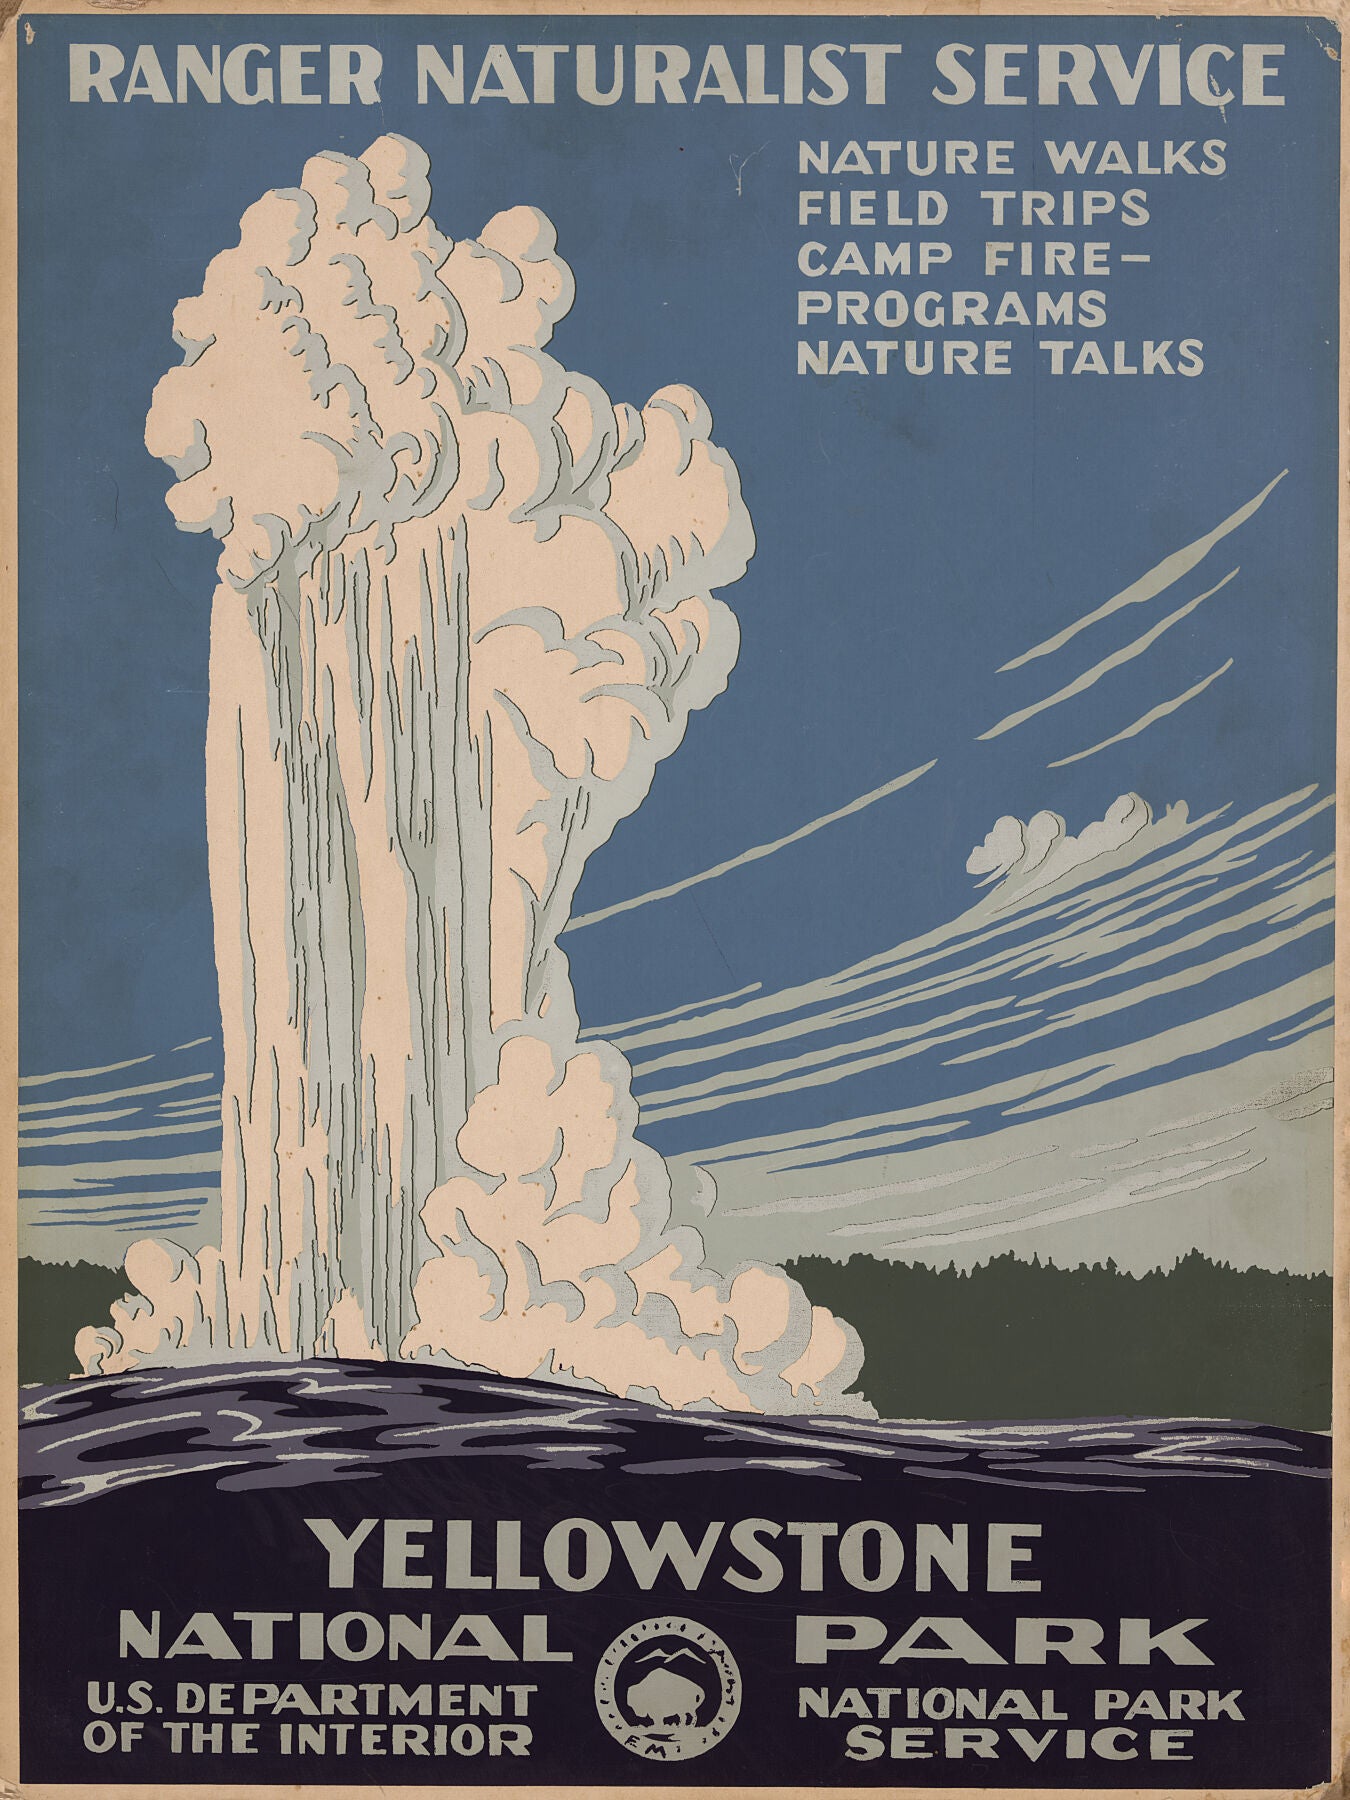 Yellowstone National Park by C. Don Powell,- ca. 1938